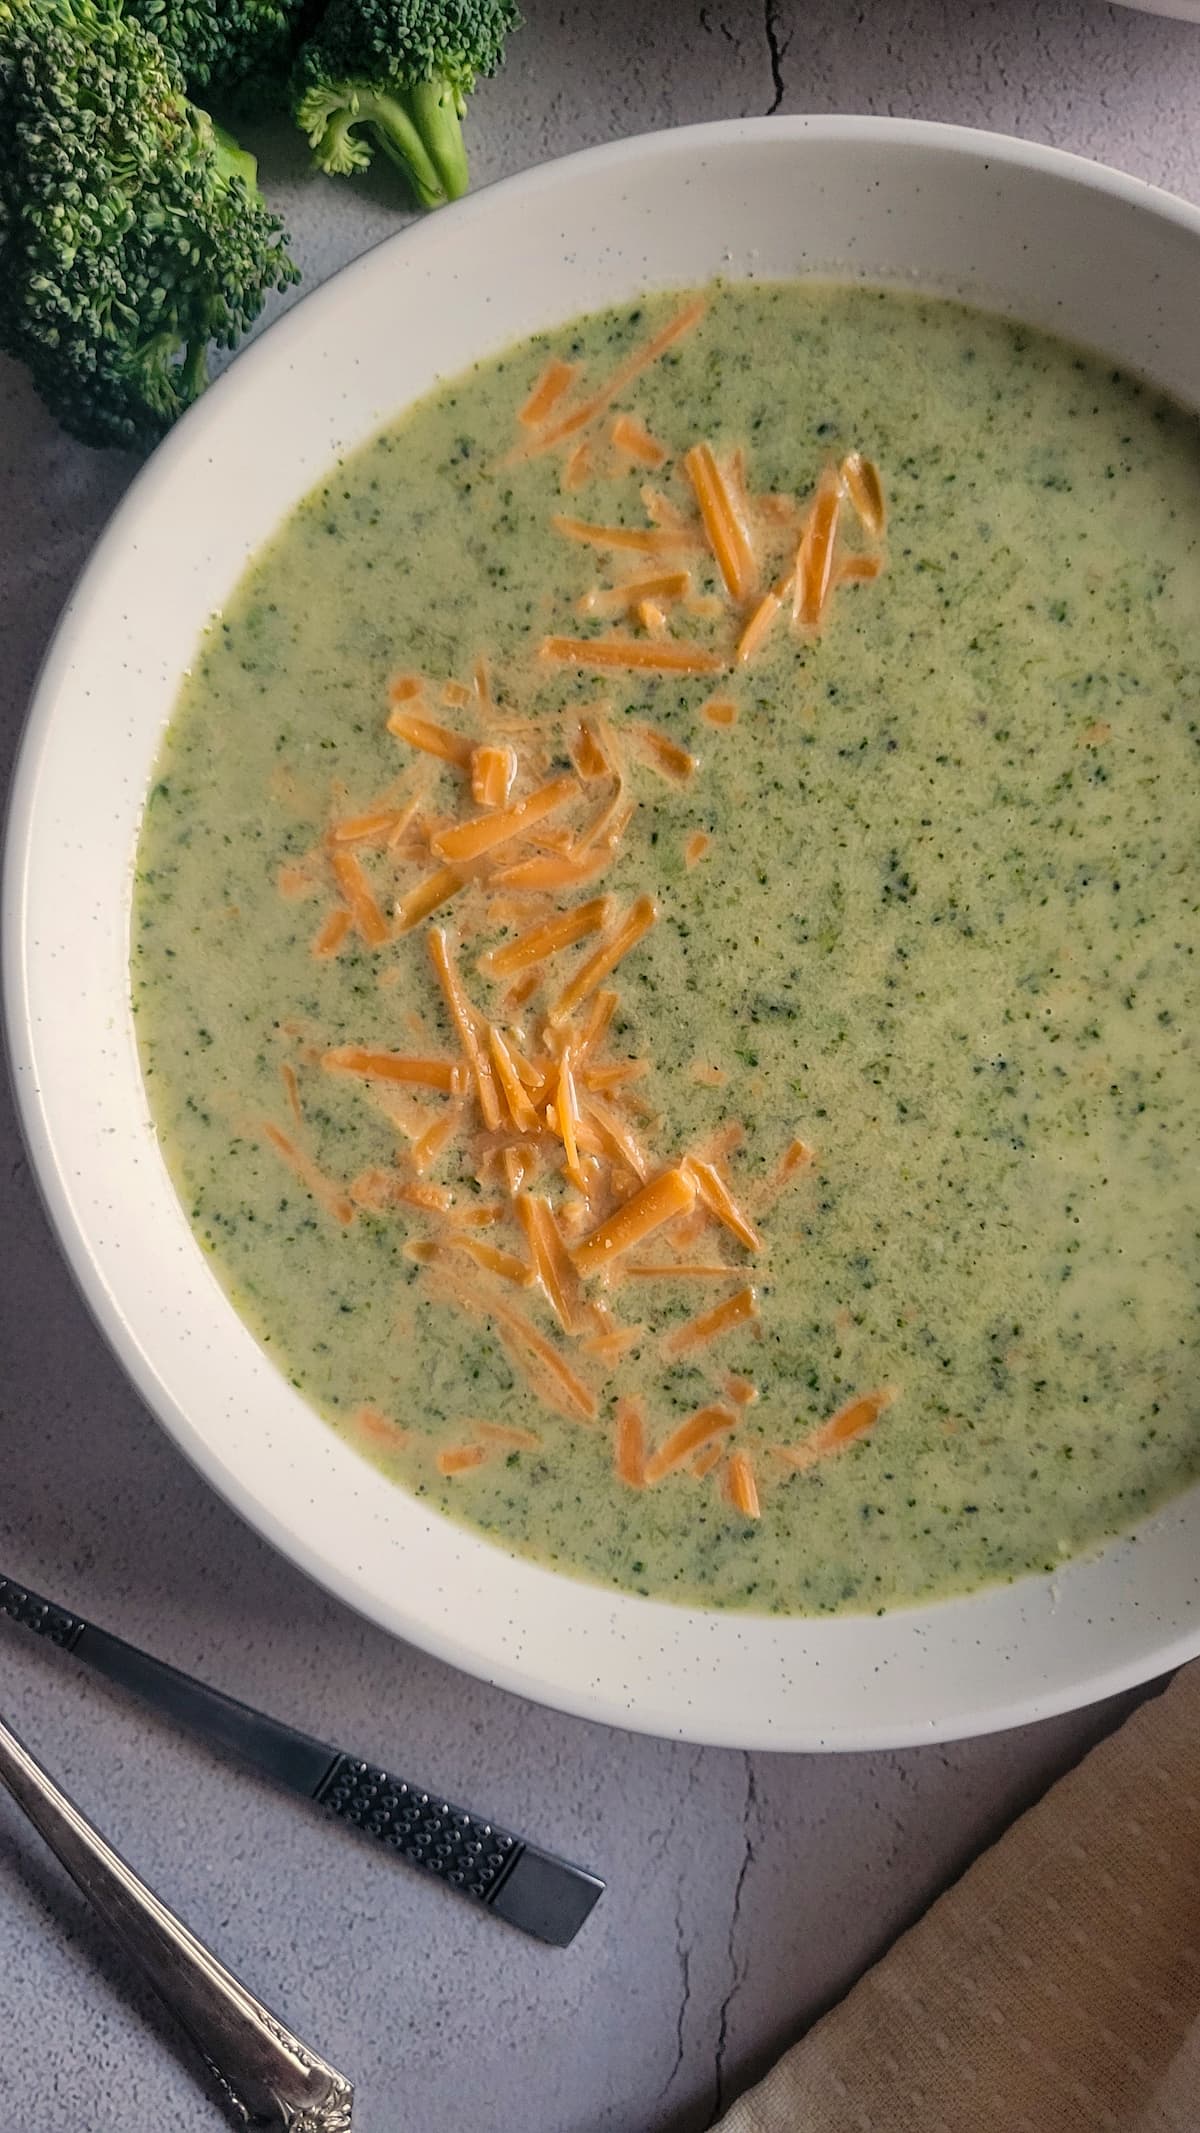 broccoli & cheese soup next to some broccoli florets